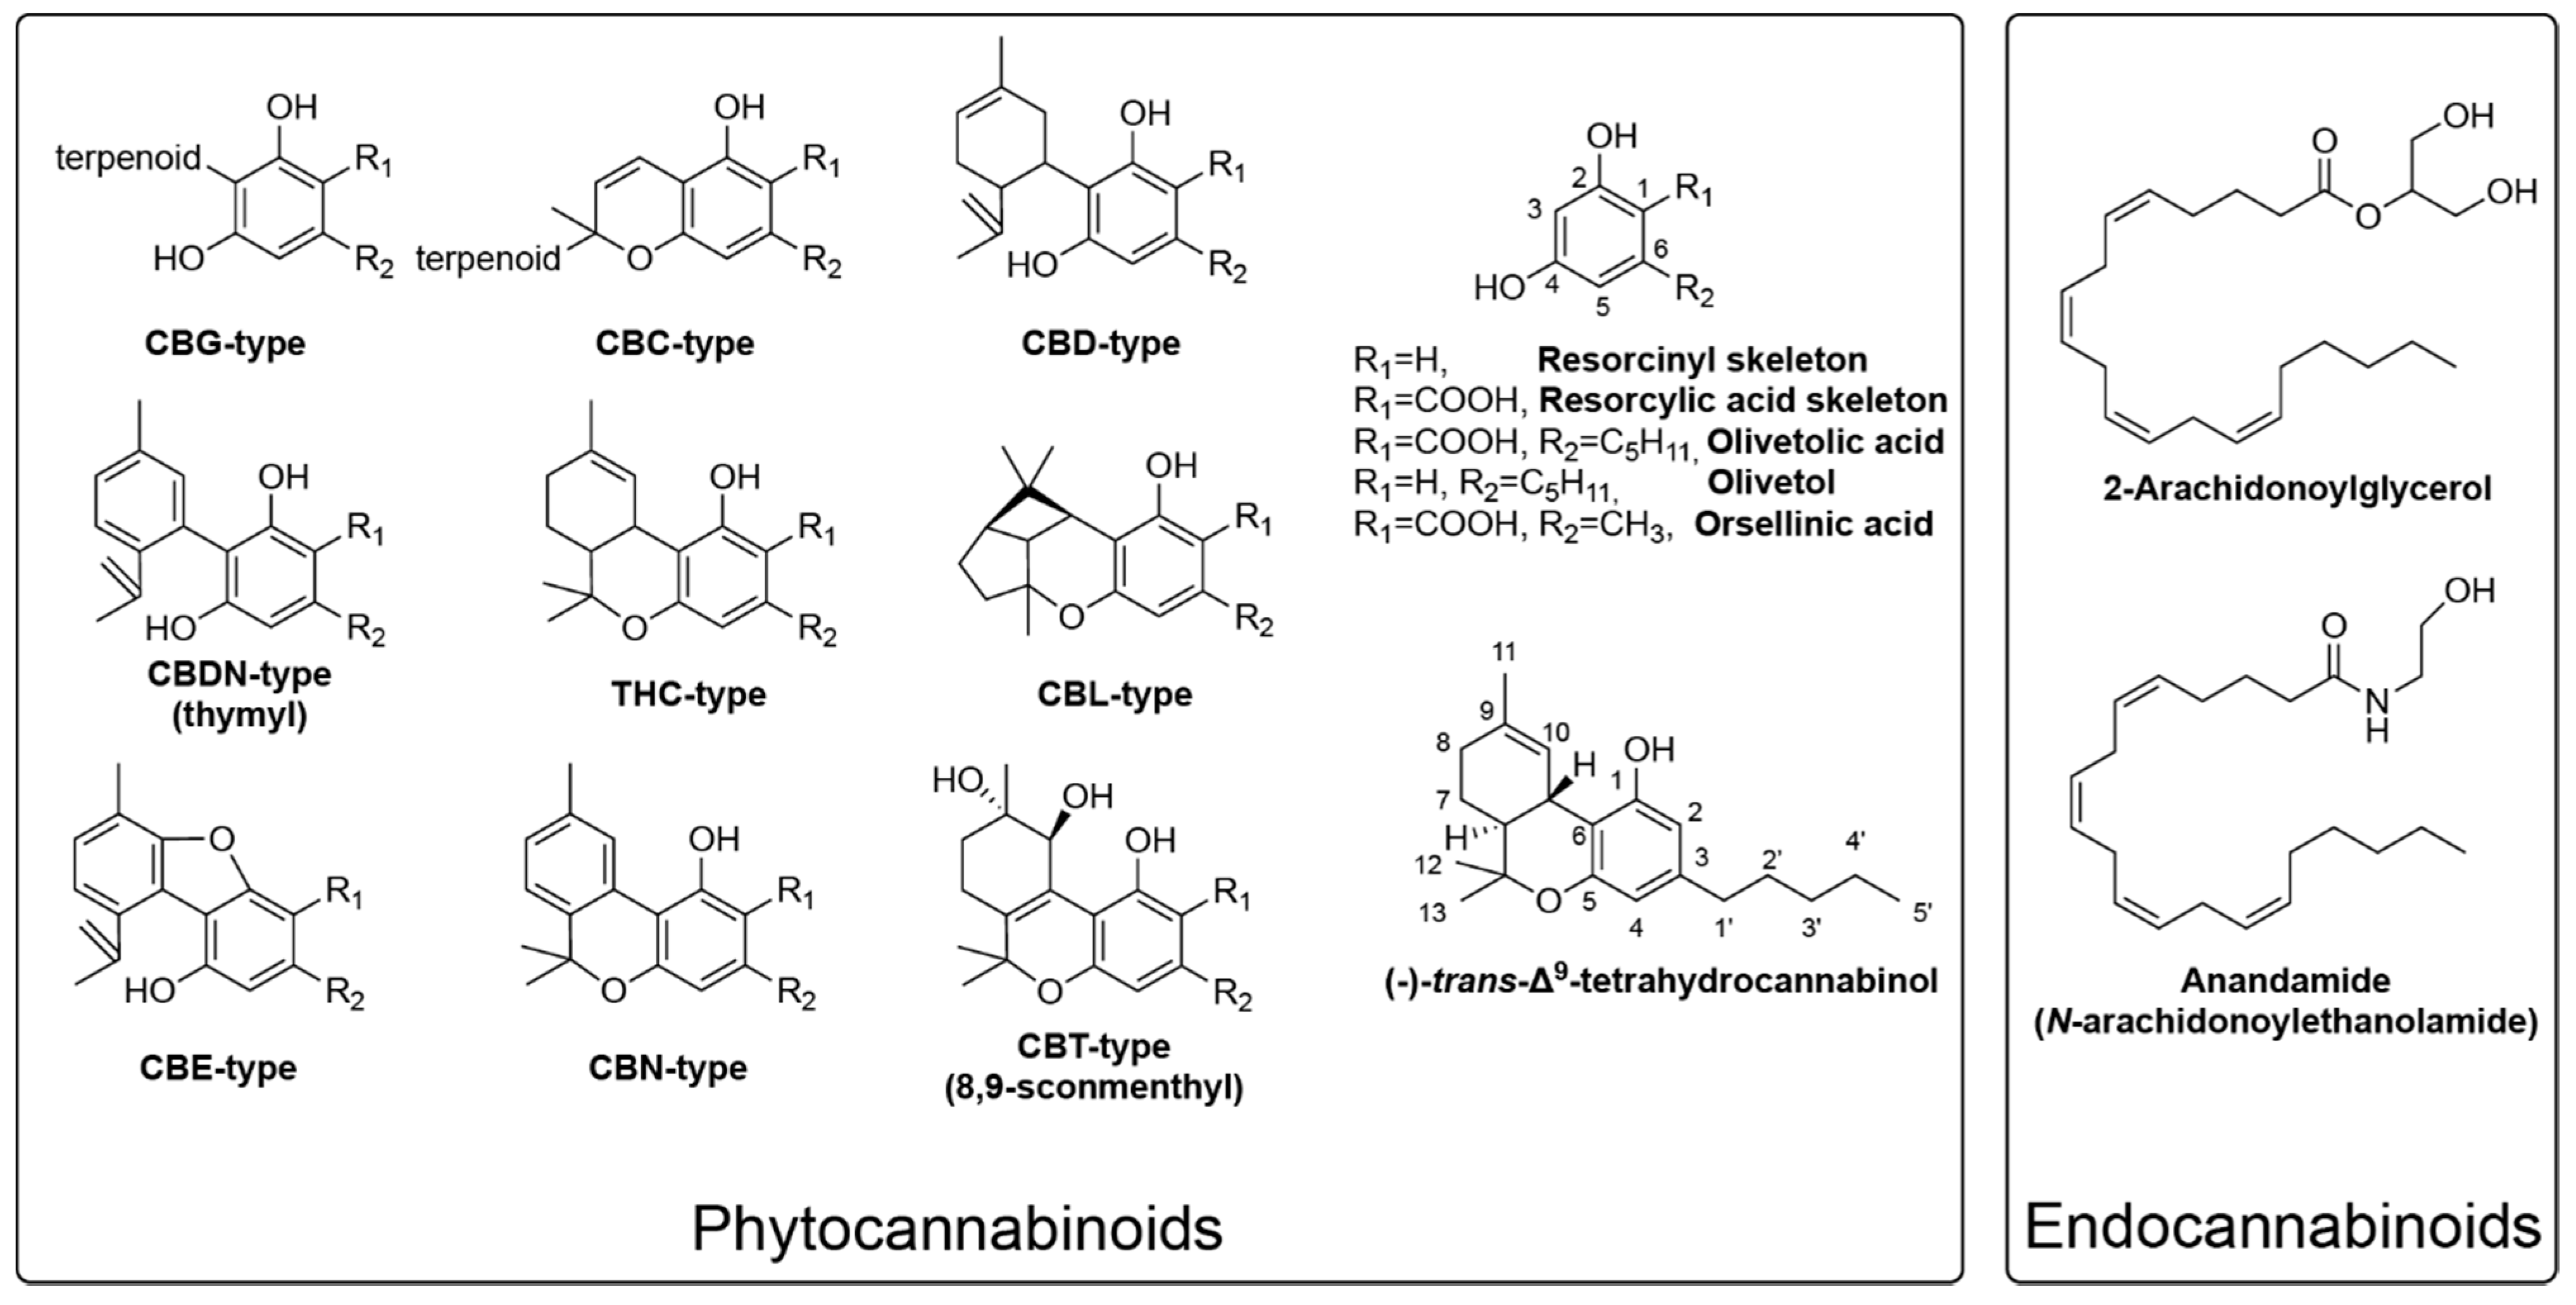 Flavonoids in Cannabis sativa: Biosynthesis, Bioactivities, and  Biotechnology